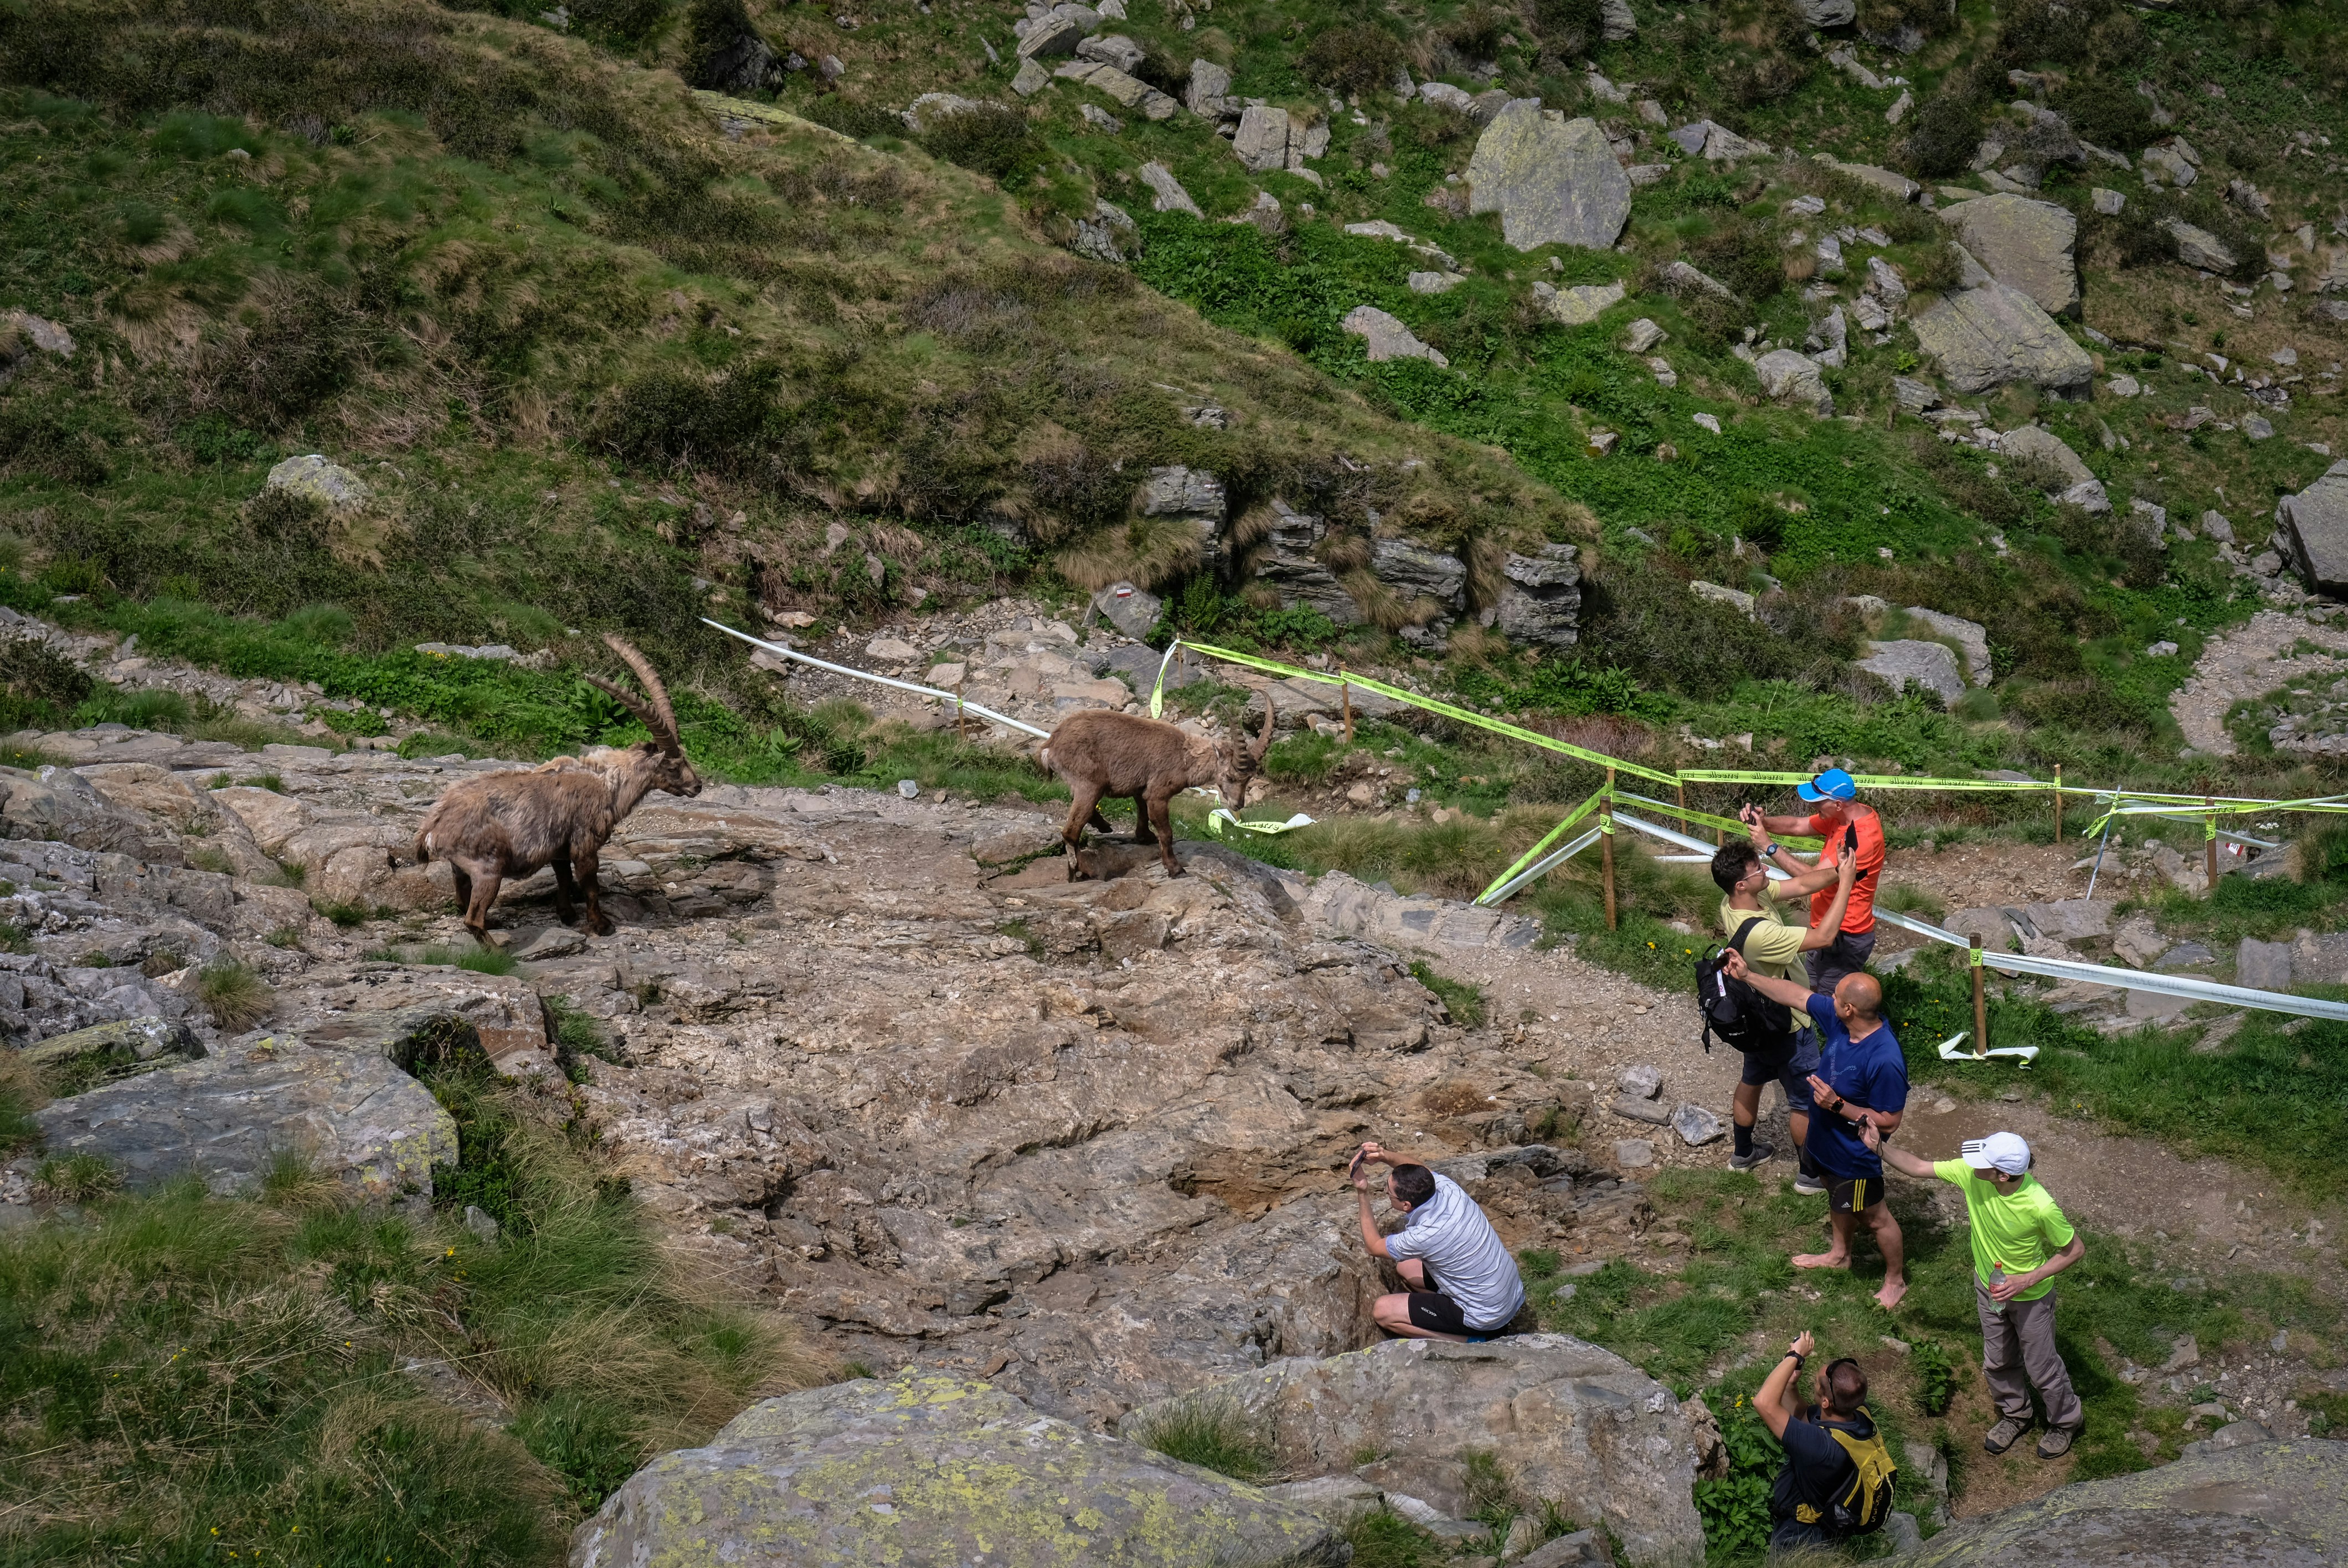 people near animals on rocky field during day